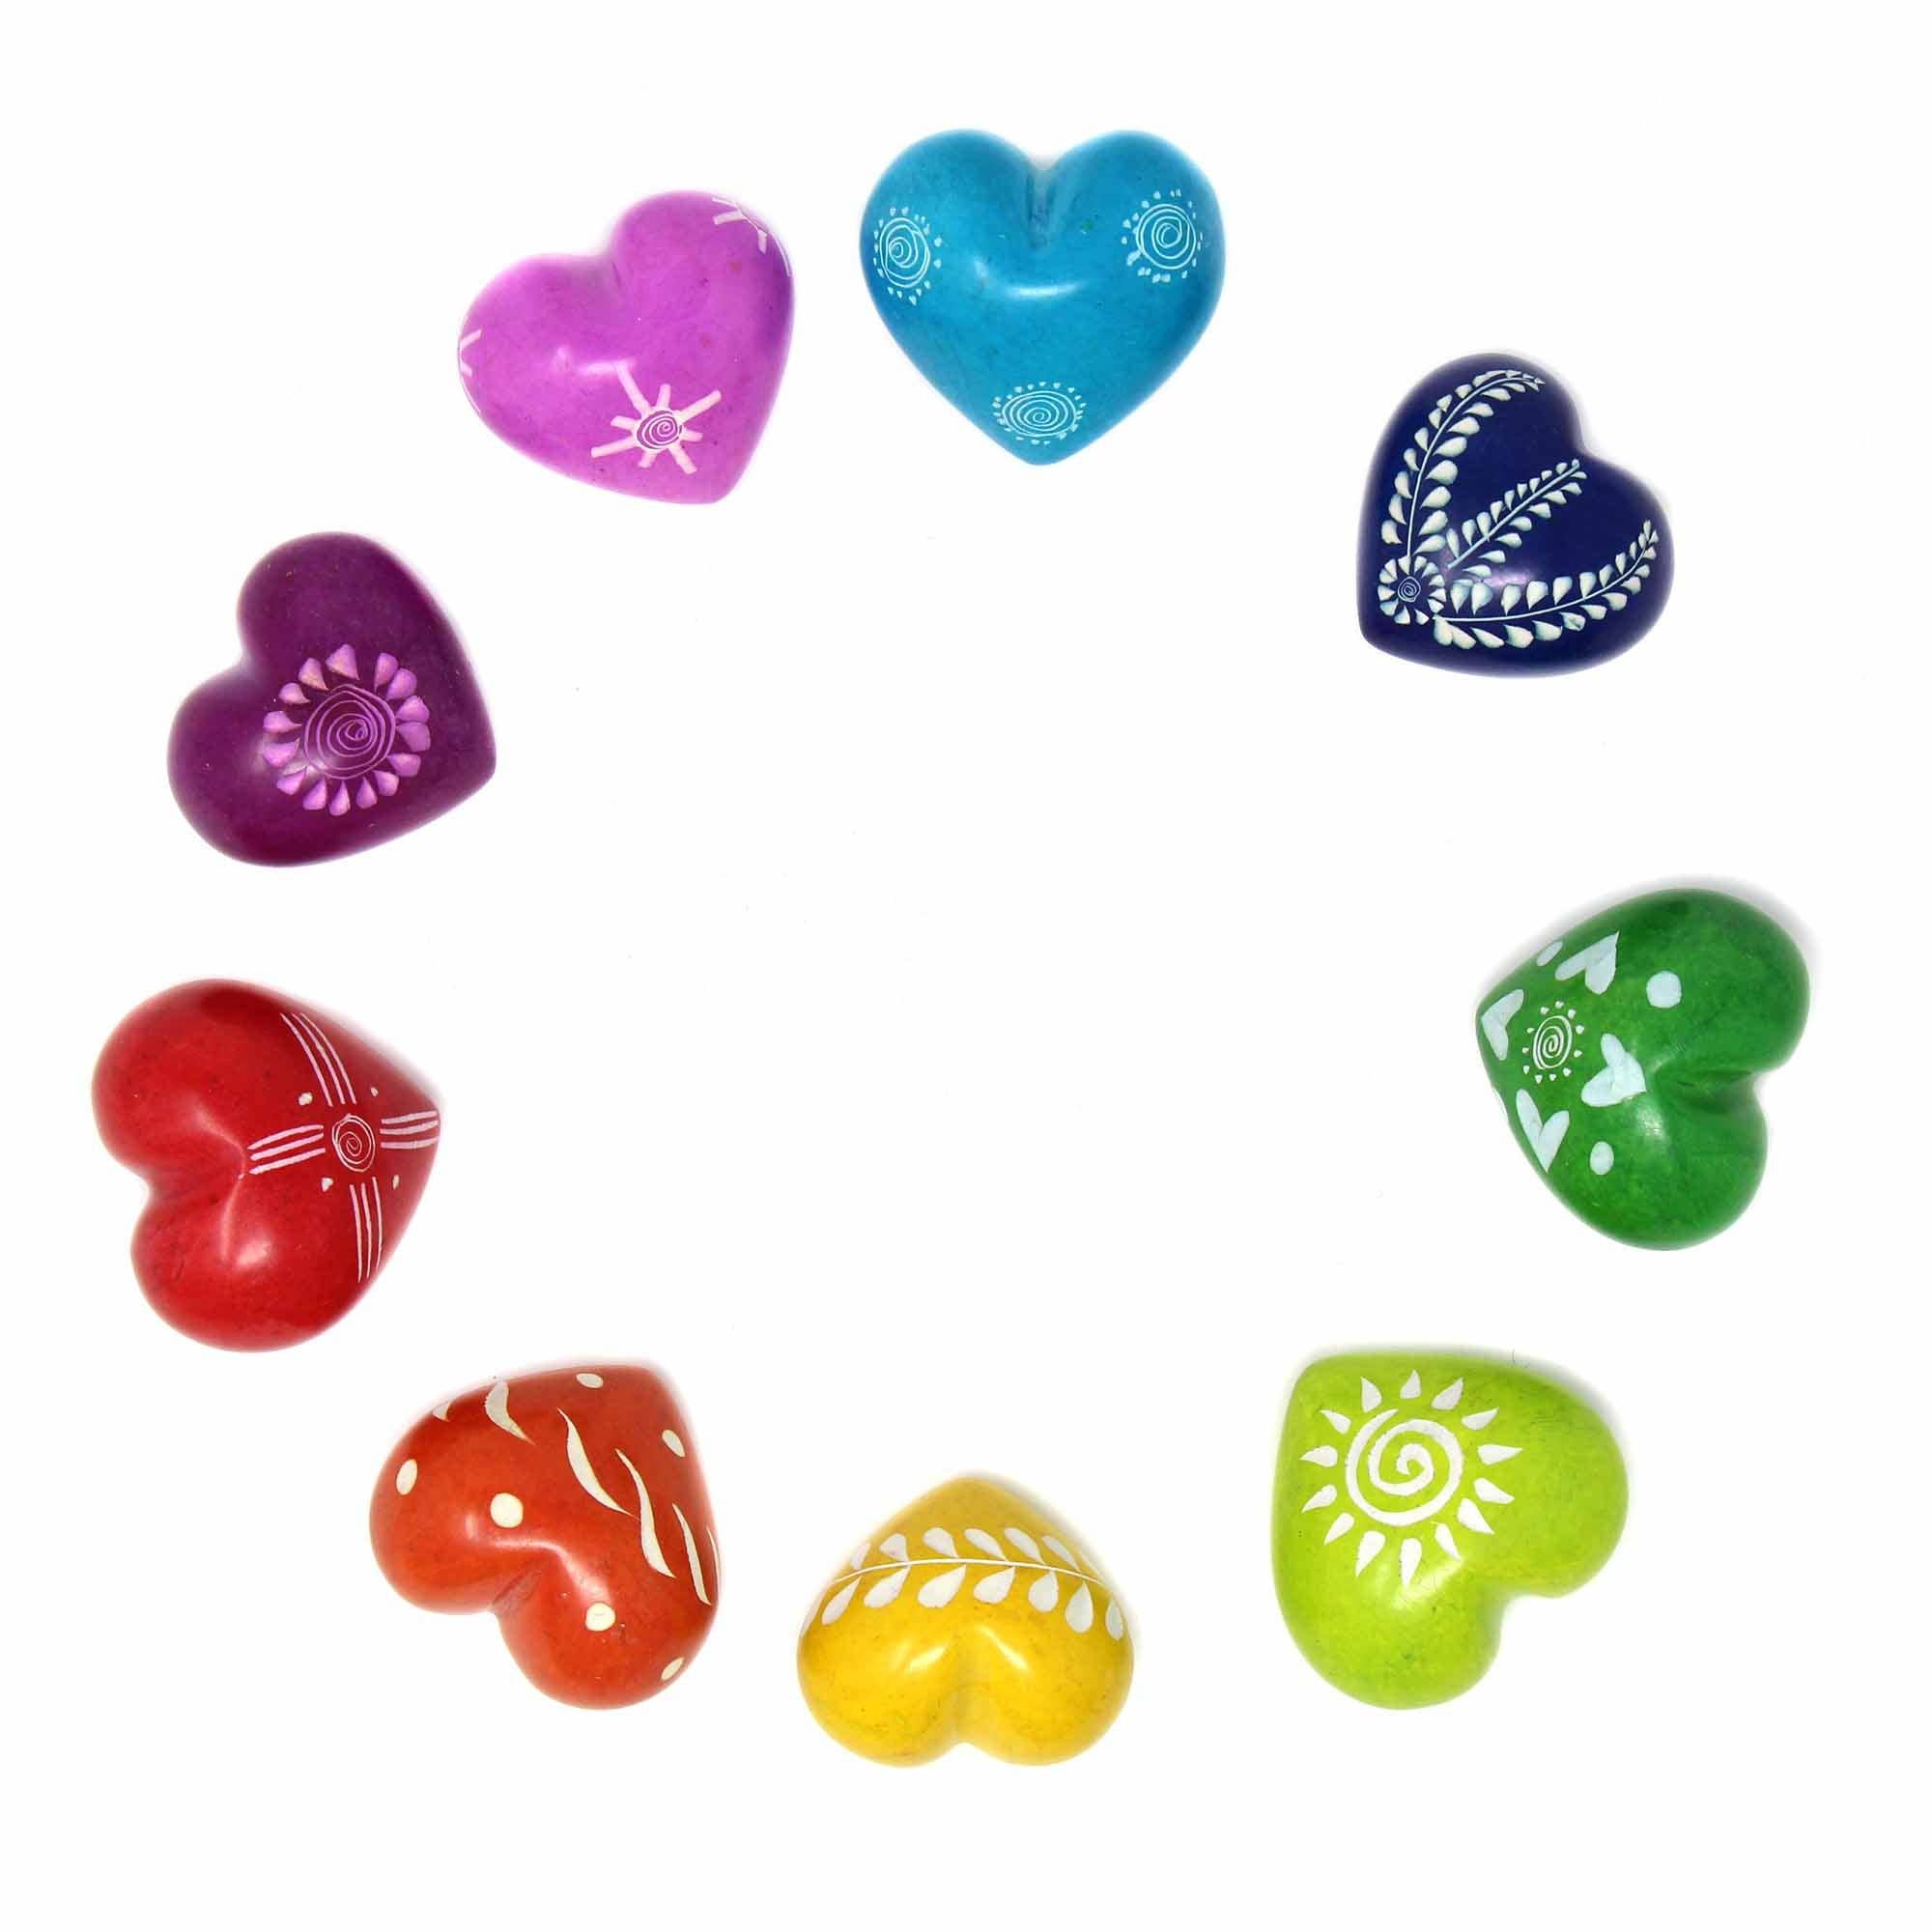 Soapstone Hearts in Assorted Colors with Designs - Spiral Circle